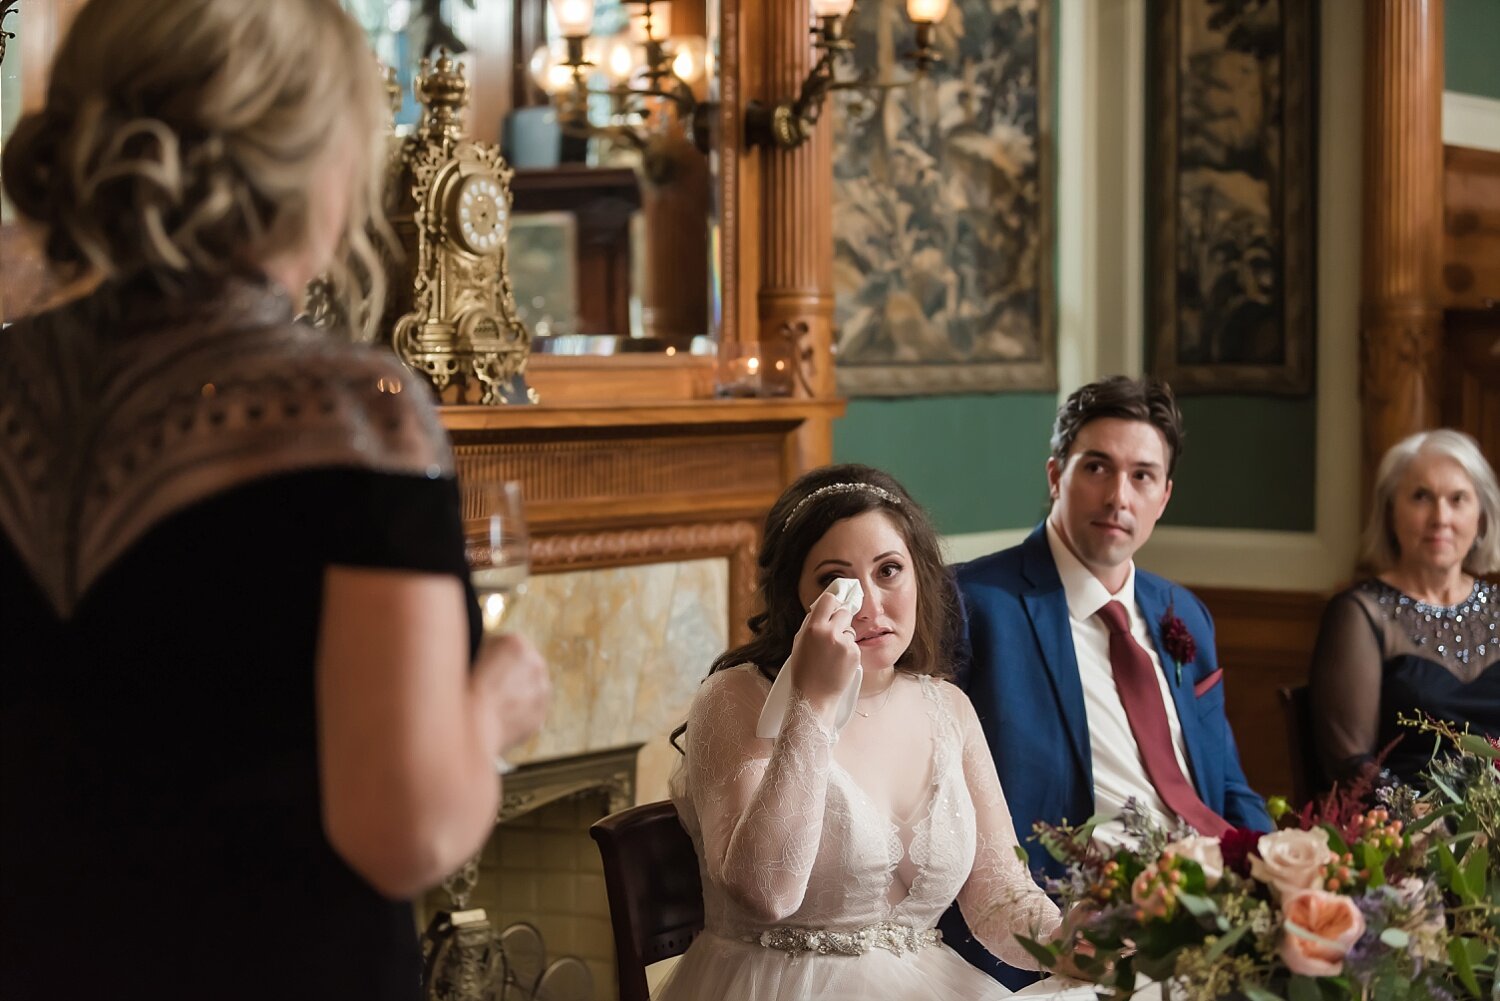  A bride tears up at her mother’s speech during her dinner party reception.  